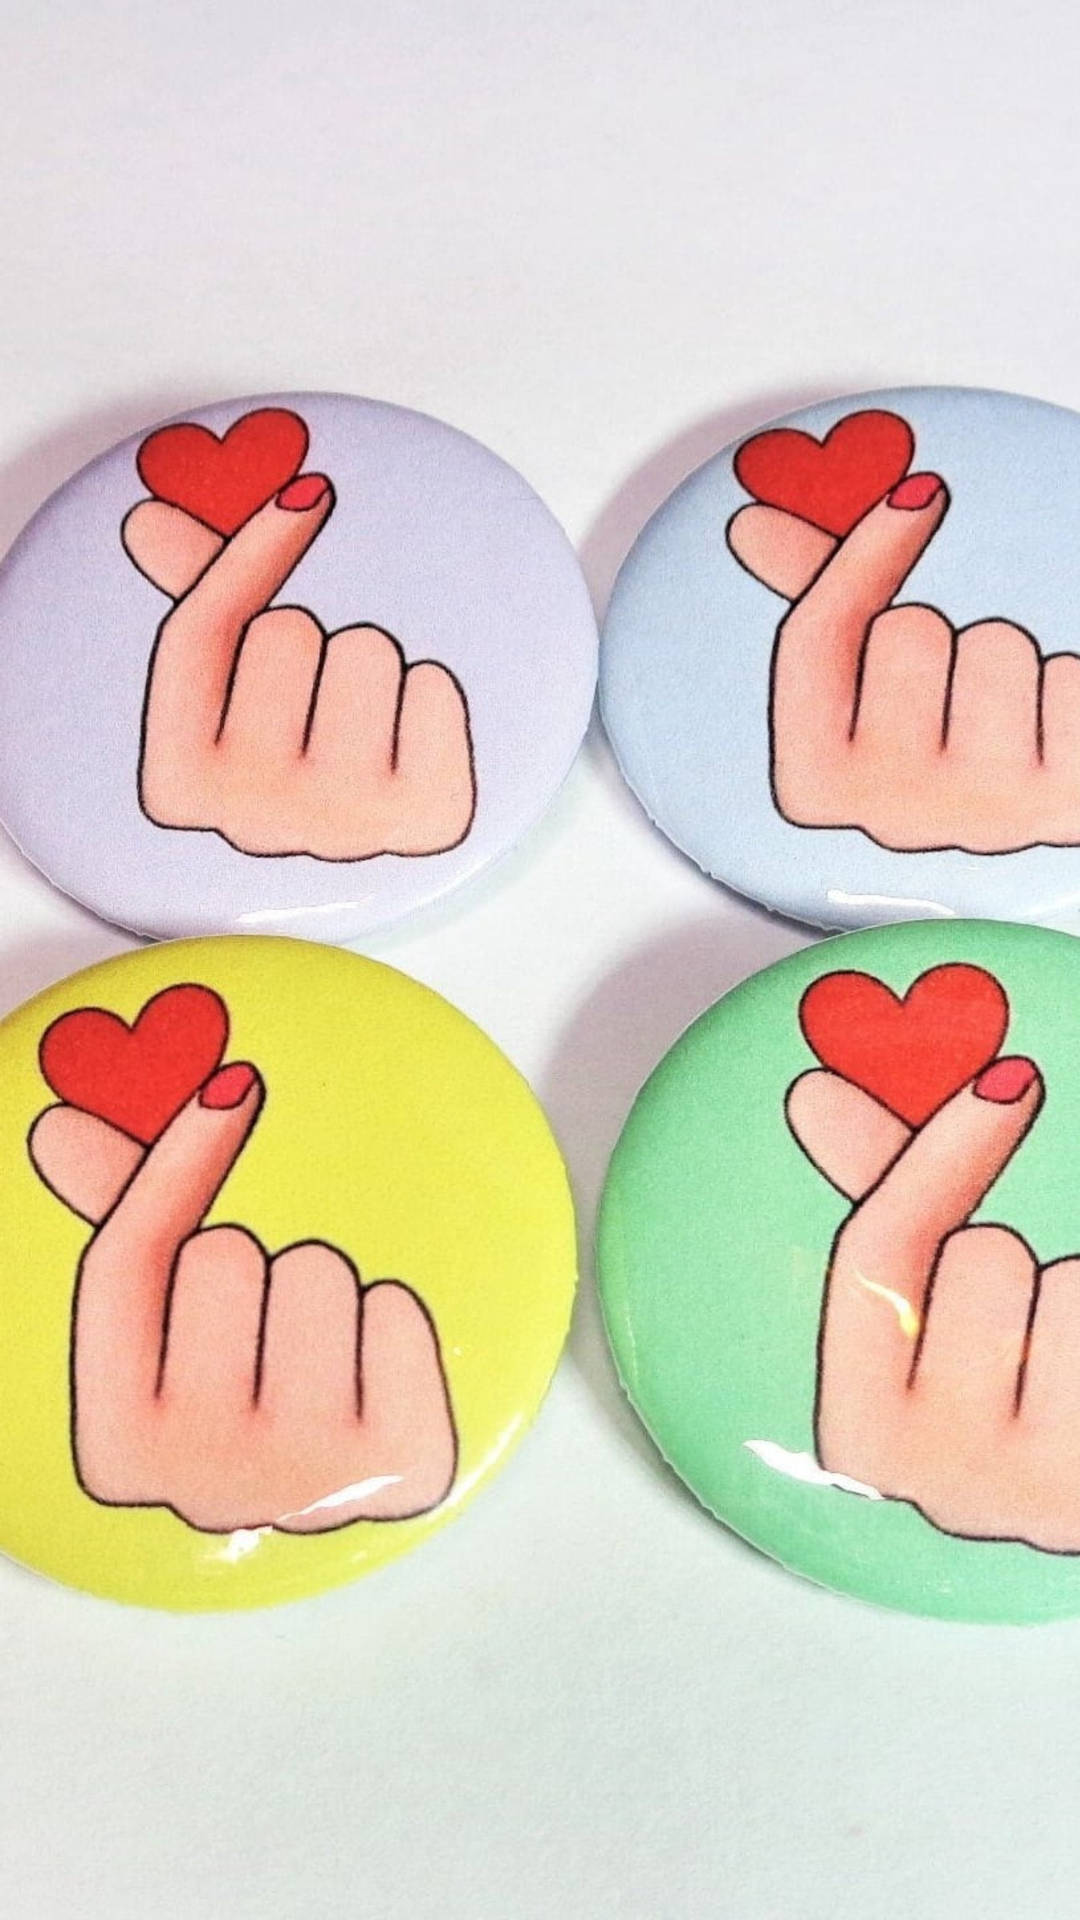 Expressing Love with a Saranghae Finger Heart Pin. Wallpaper